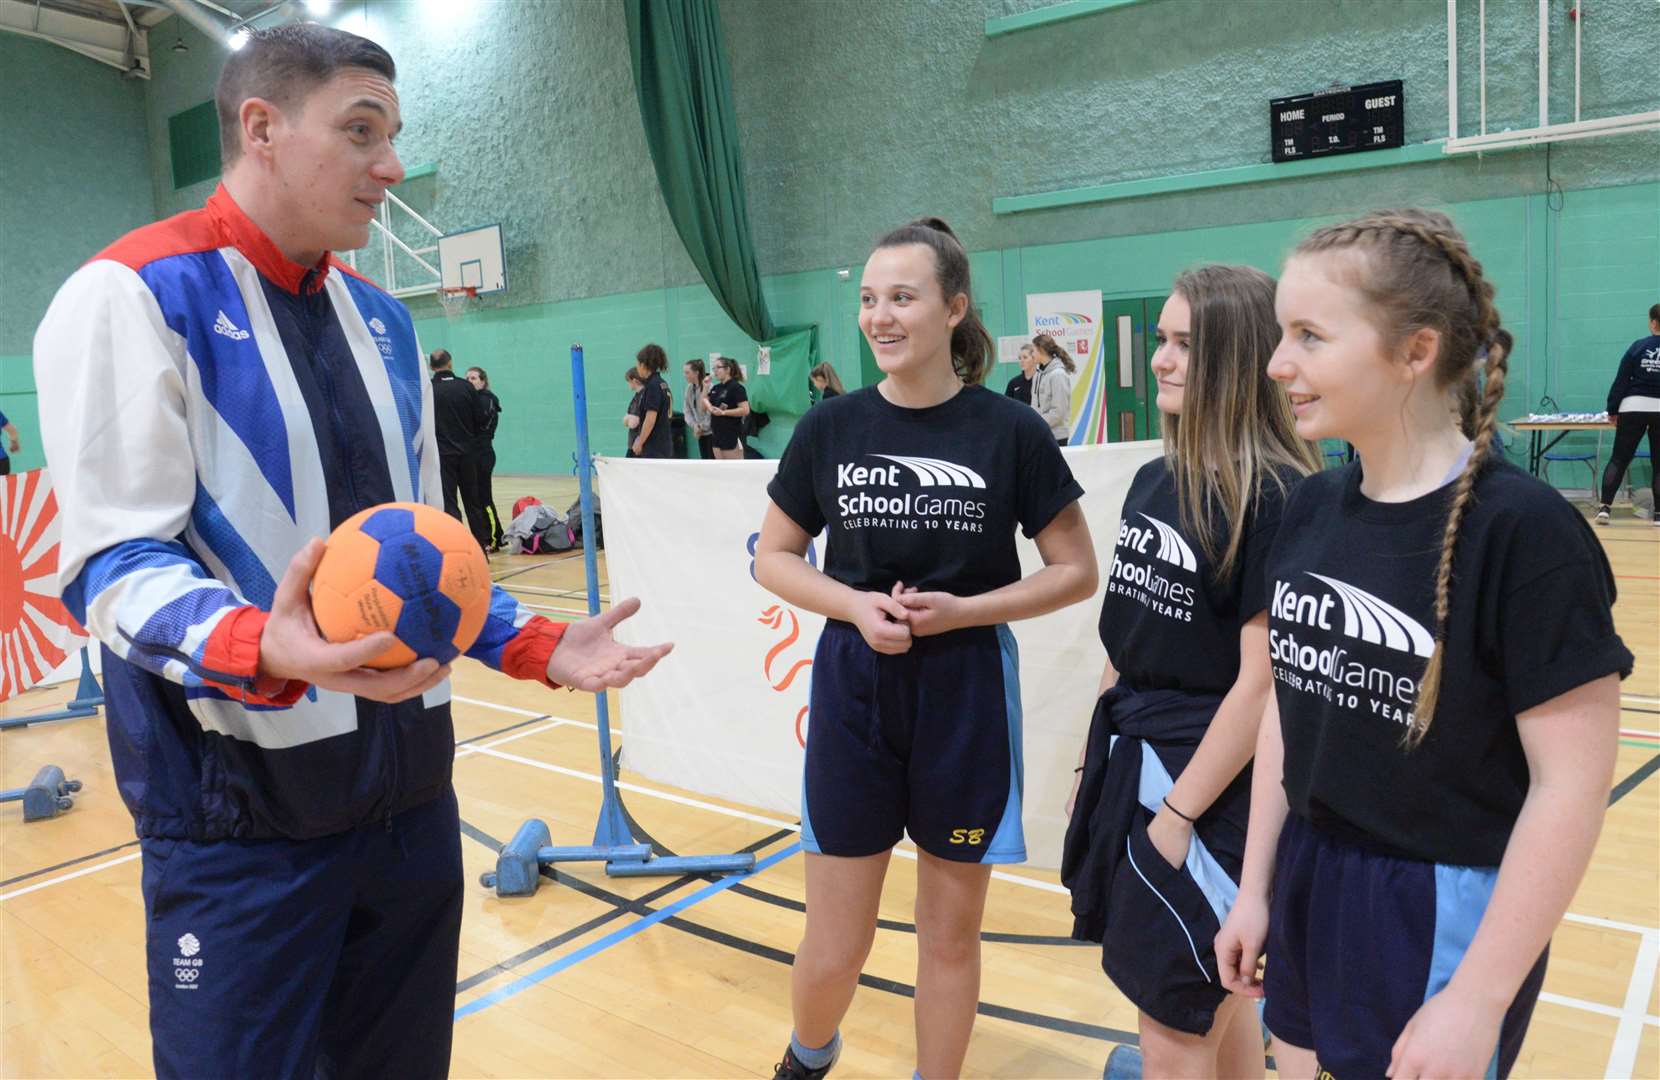 Back in 2018, GB Handball captain Bobby White chats with pupils from Fort Pitt School at the Kent School Games handball tournament at Medway Park. Picture: Chris Davey (43967924)